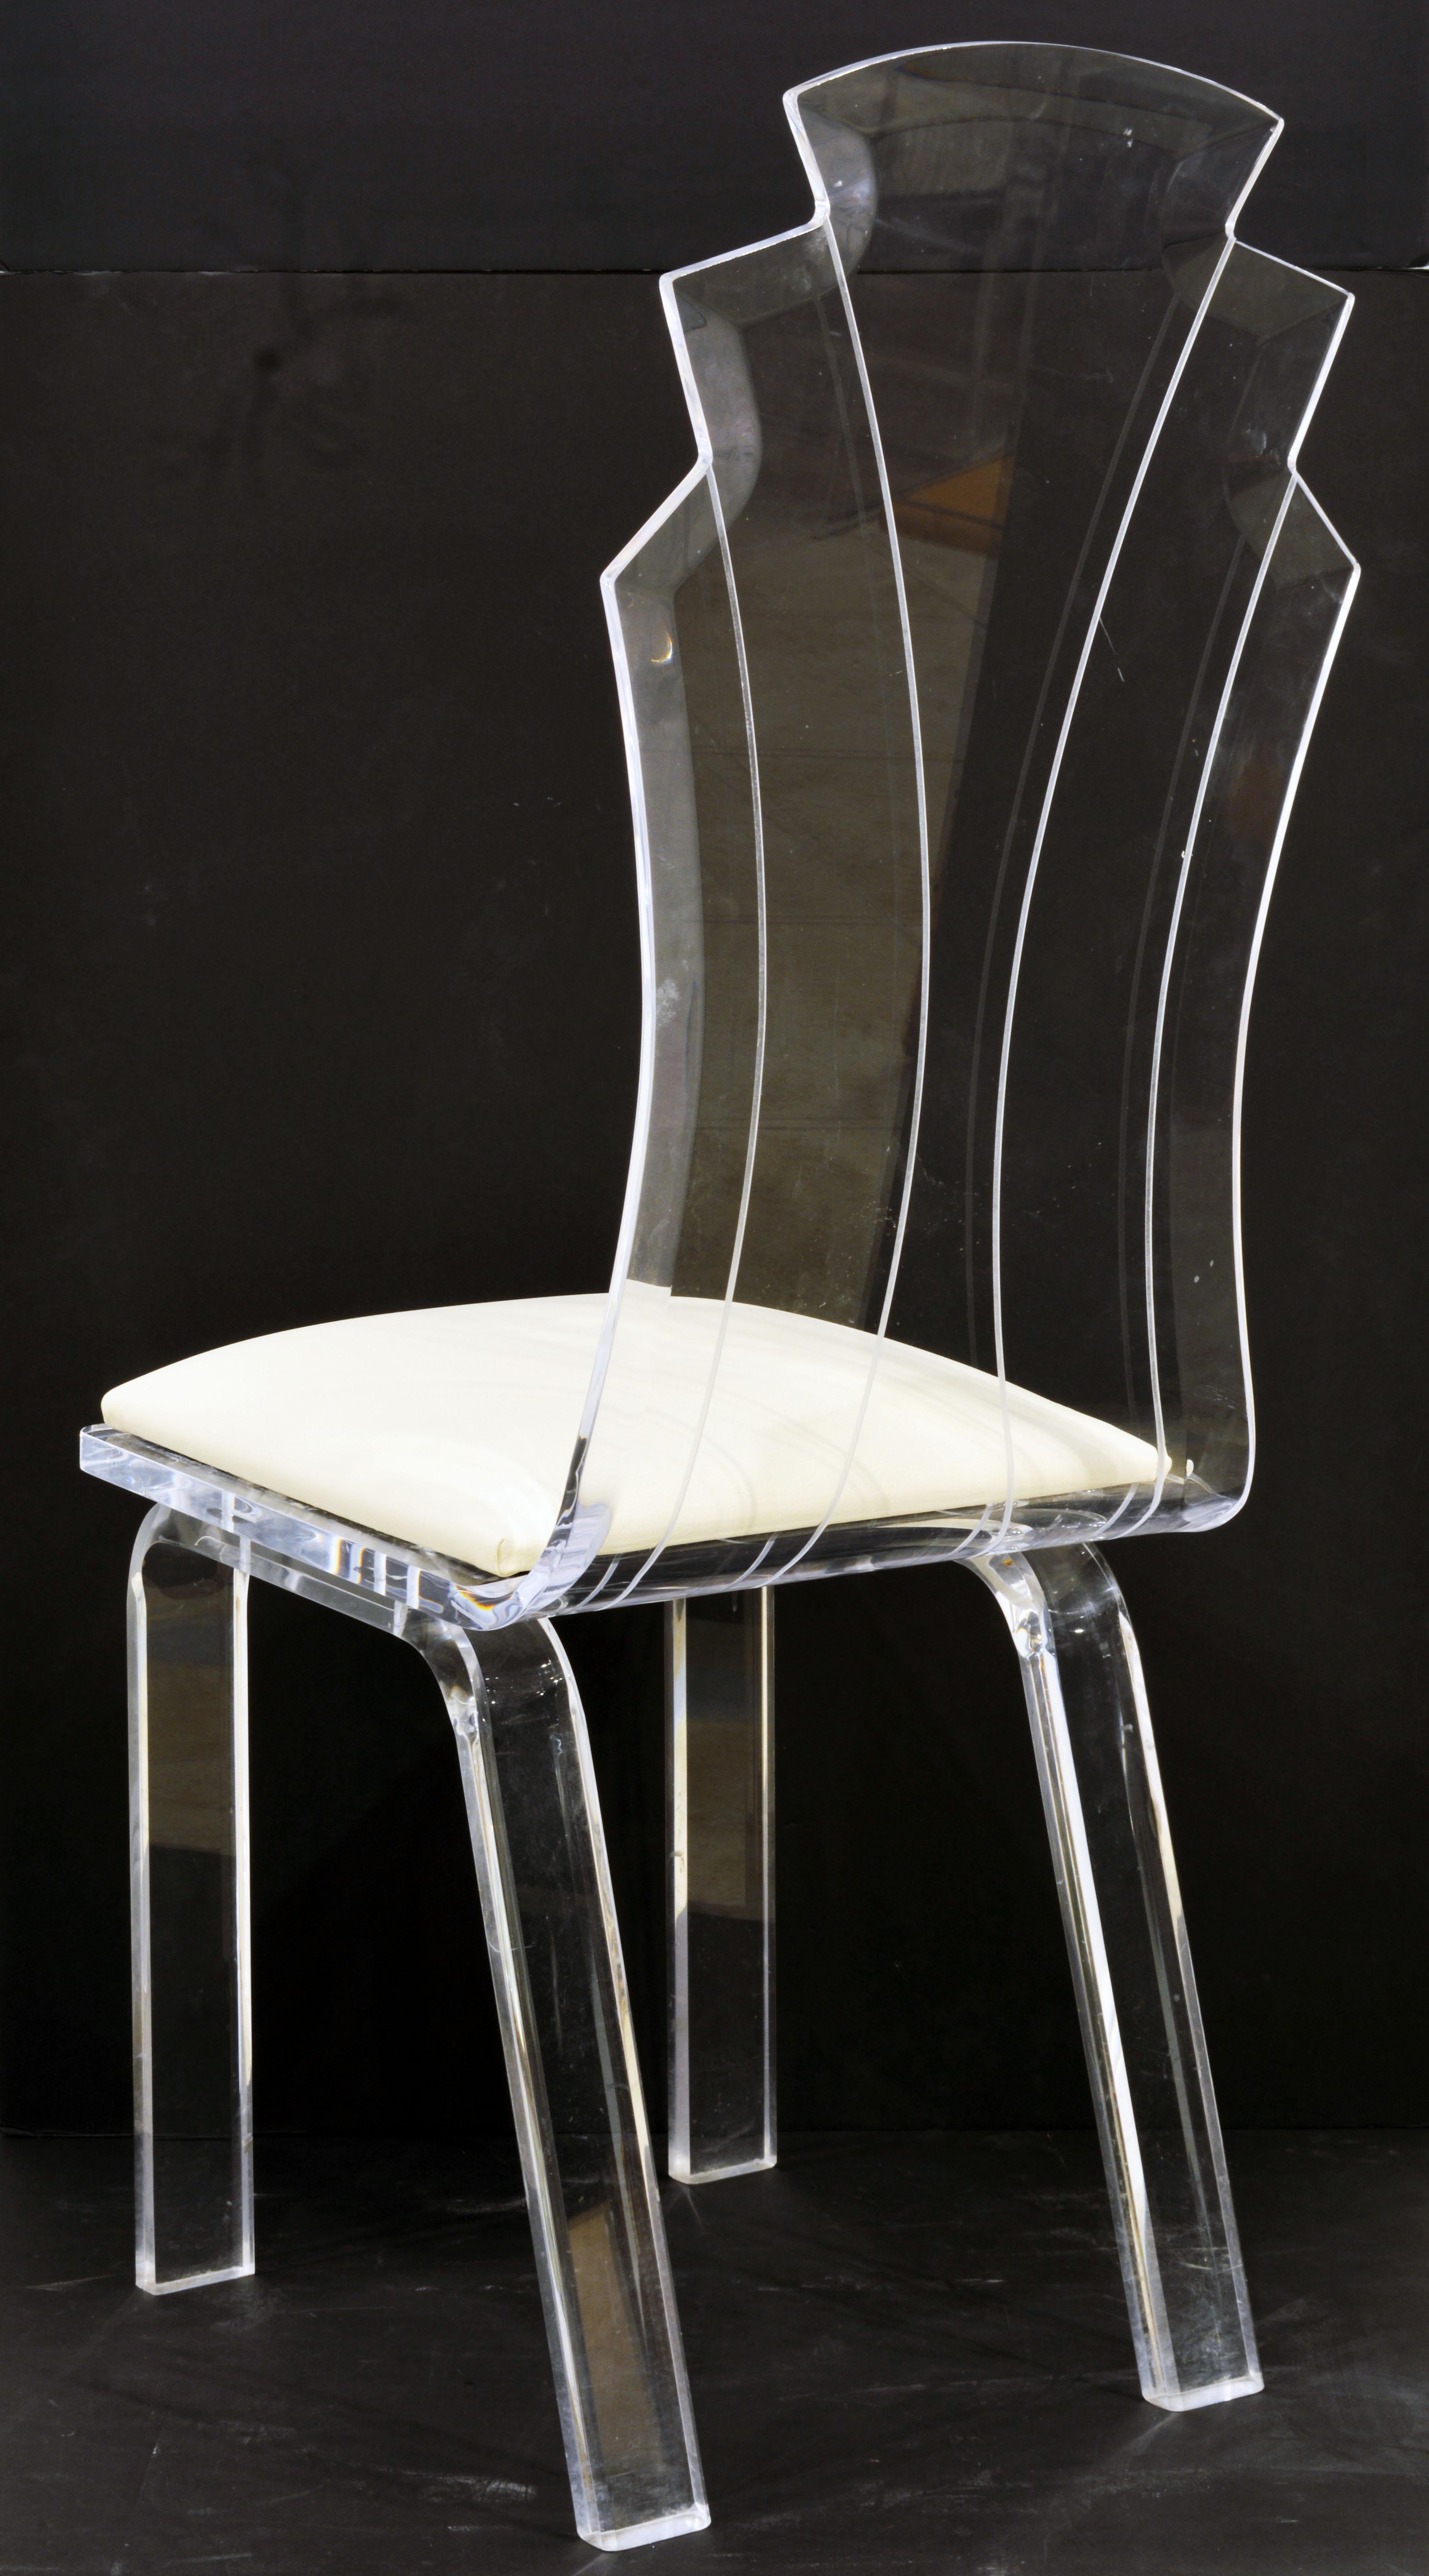 A set of 6 rare art deco style Lucite dining chairs of excellent construction and beautifully shaped and crafted fan form backrests with etched pattern lines. The chairs come with newly made loose off white vinyl covered cushion seats, that can be